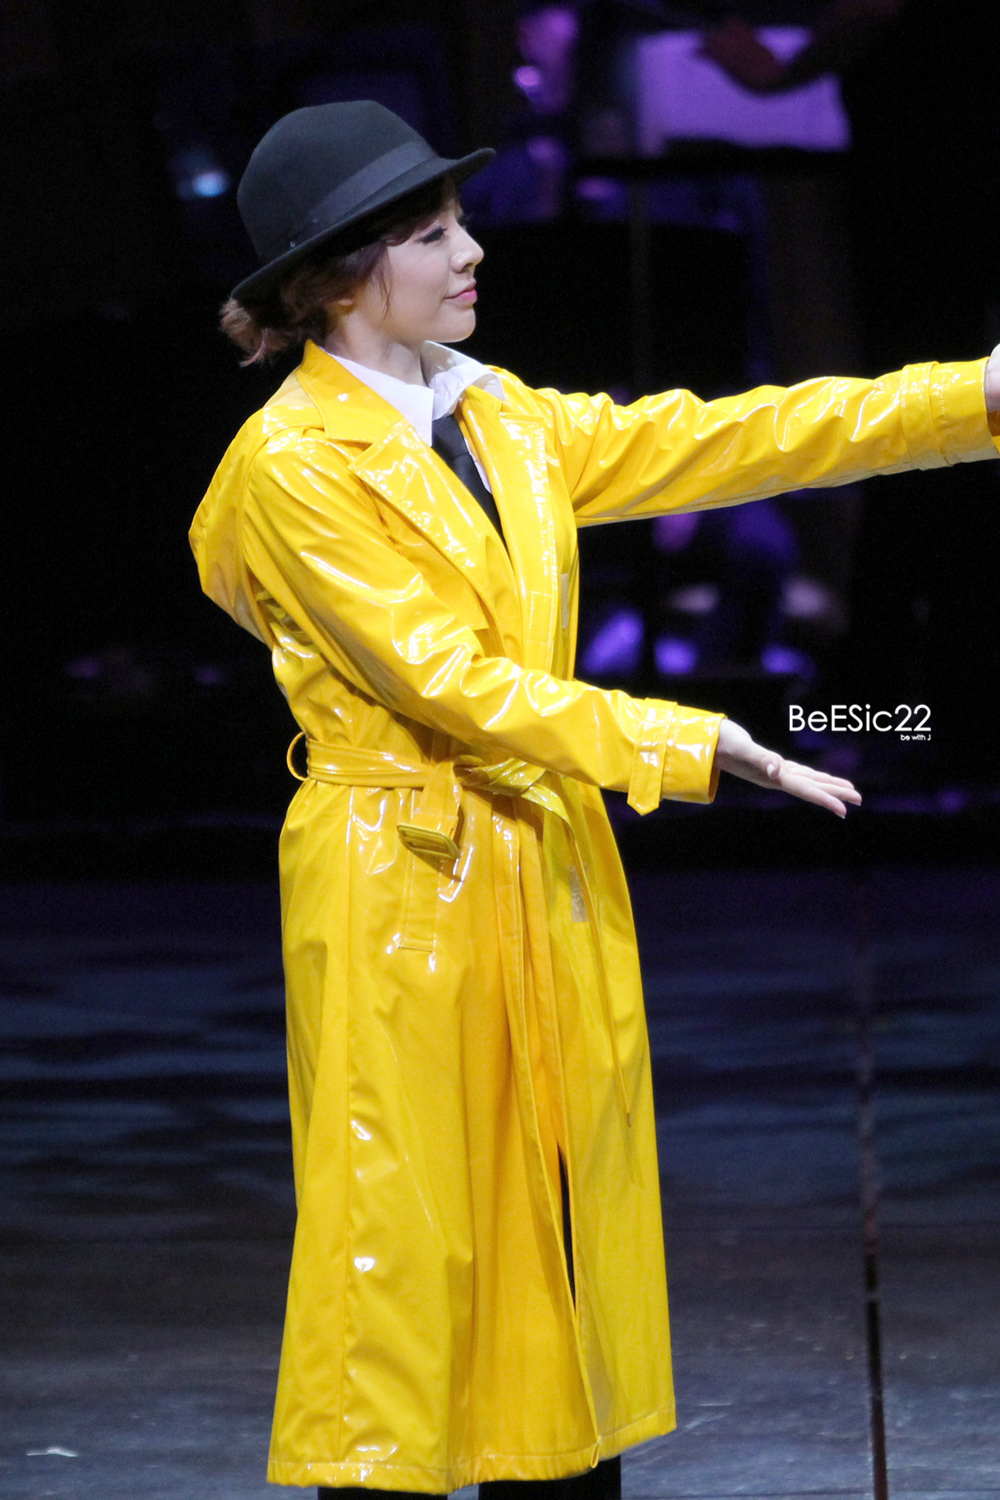 [OTHER][29-04-2014]Sunny sẽ tham gia vở nhạc kịch "SINGIN' IN THE RAIN" - Page 2 2706305053A590841509BE